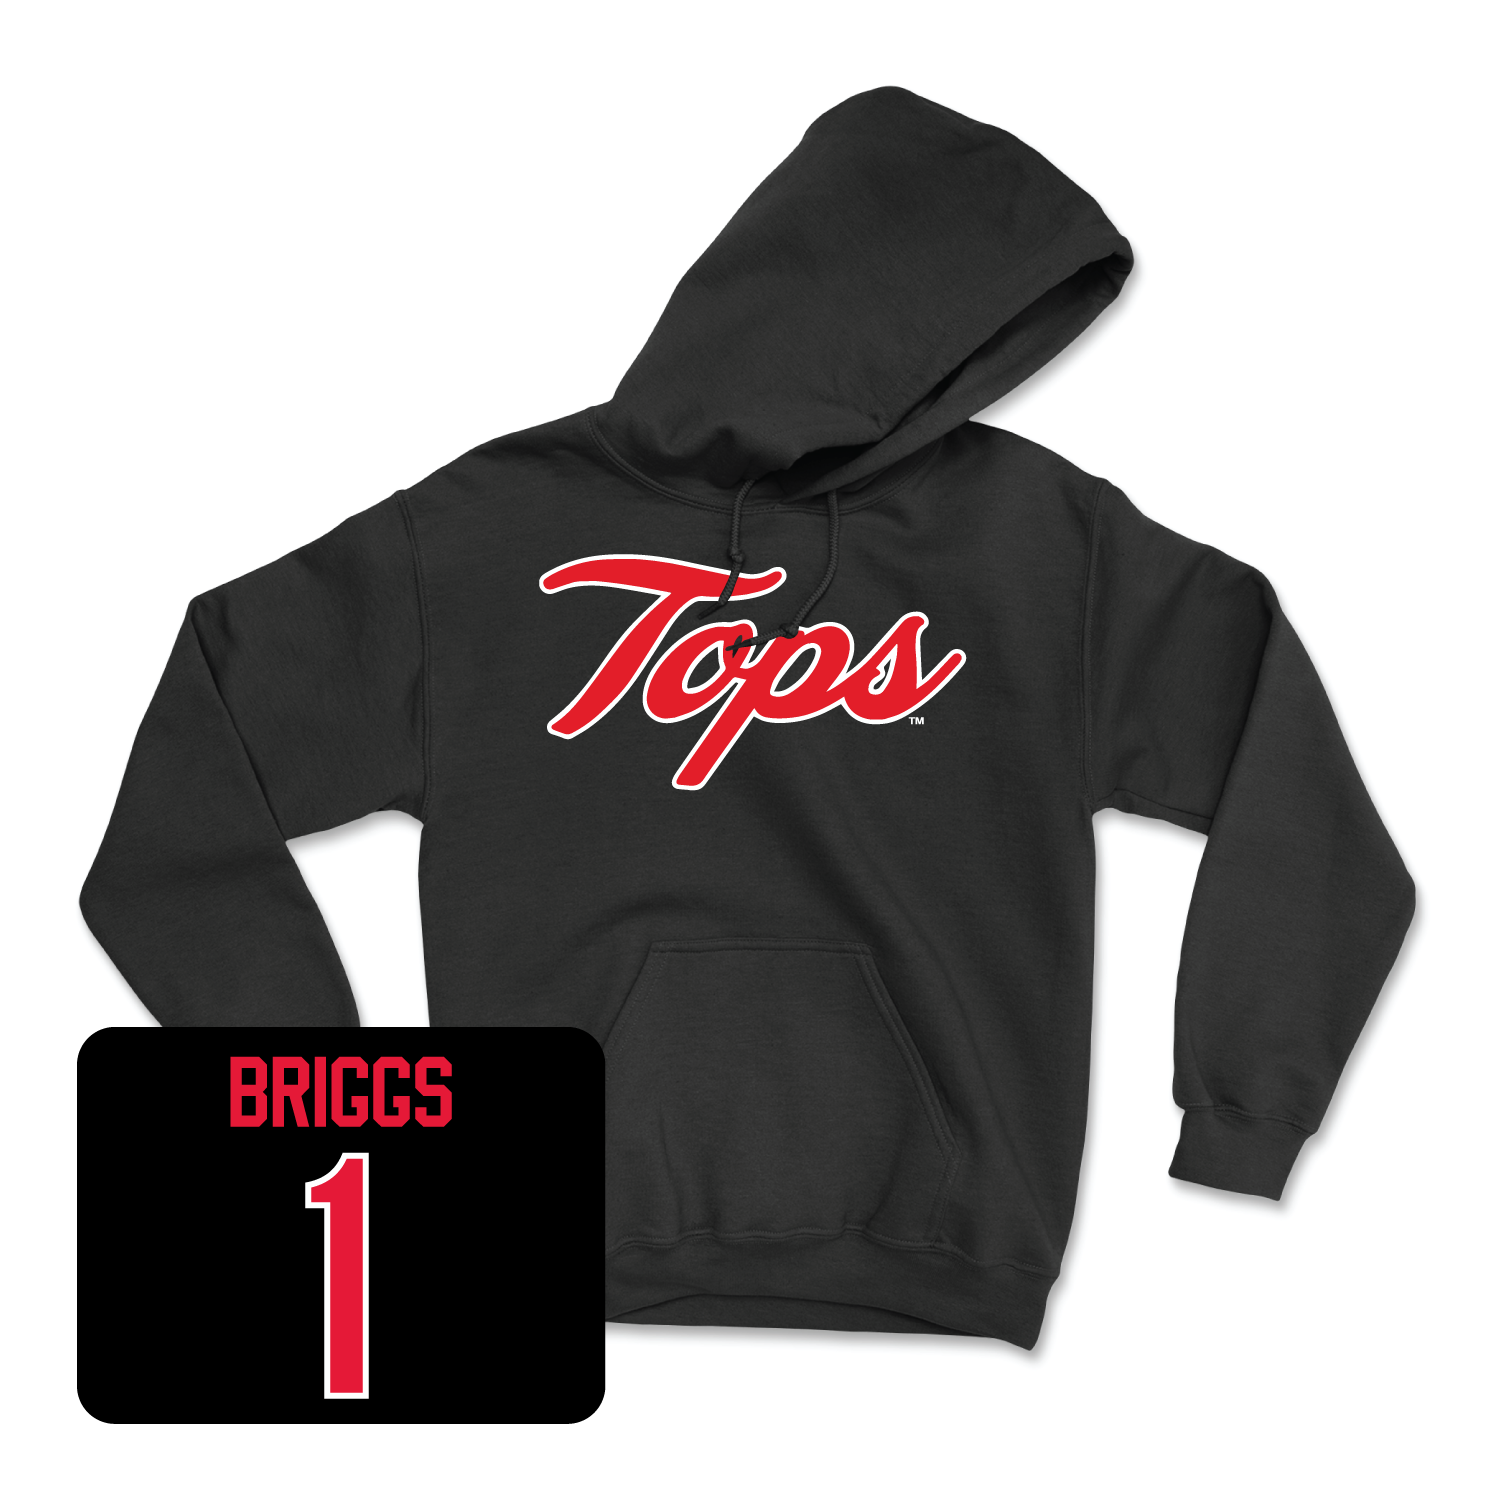 Black Women's Volleyball Tops Hoodie 2X-Large / Paige Briggs | #1